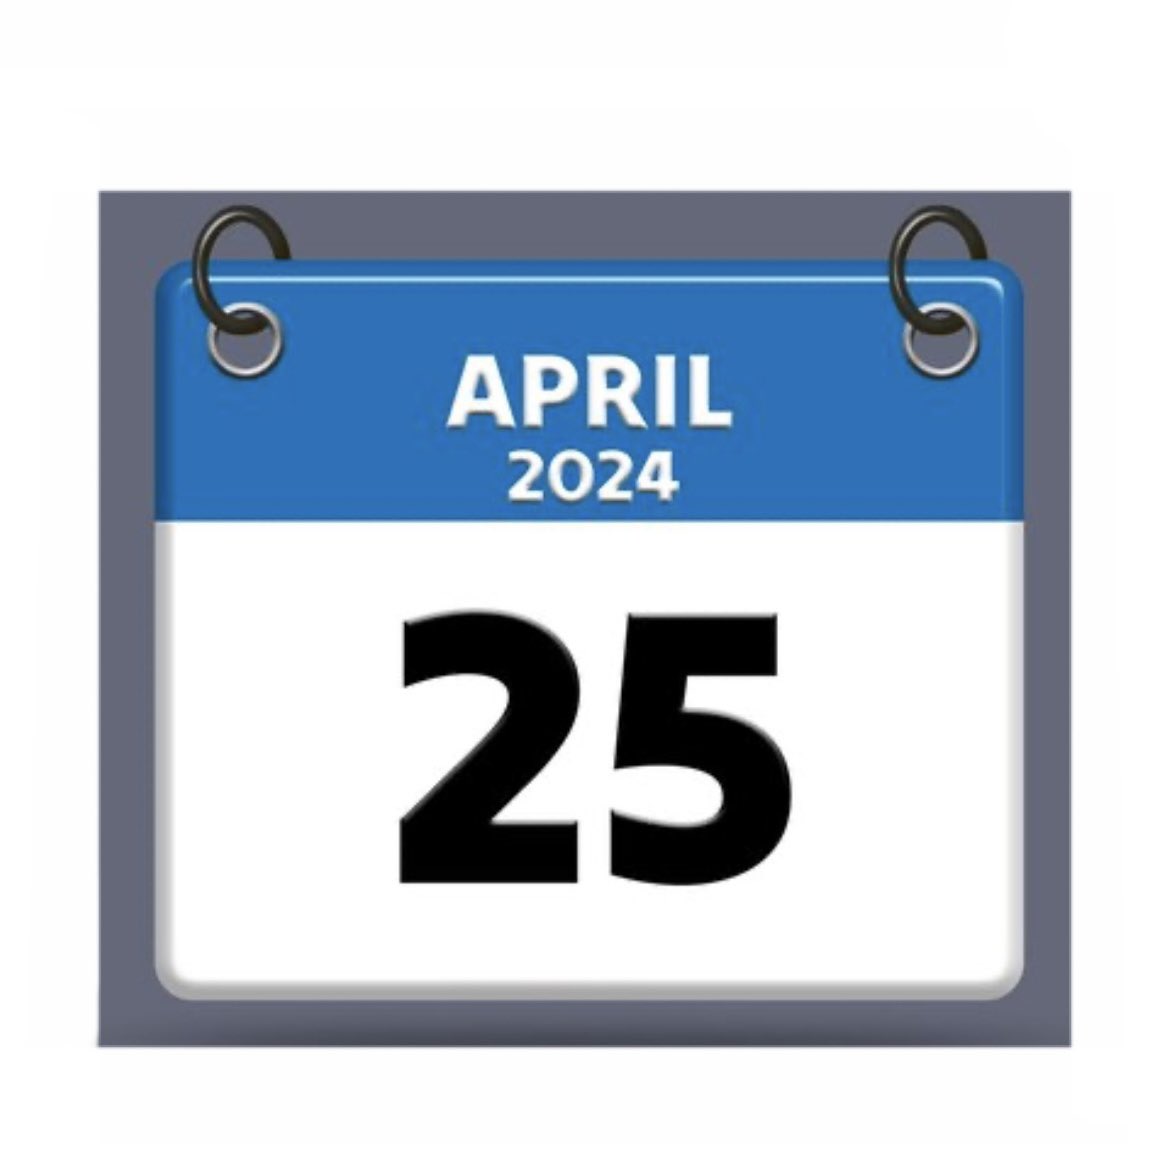 🚨Important!!! Mark Your Calendar… Thursday April 25, 2024 The Supreme Court of the United States will hear Arguments about Trump’s Immunity Claims.